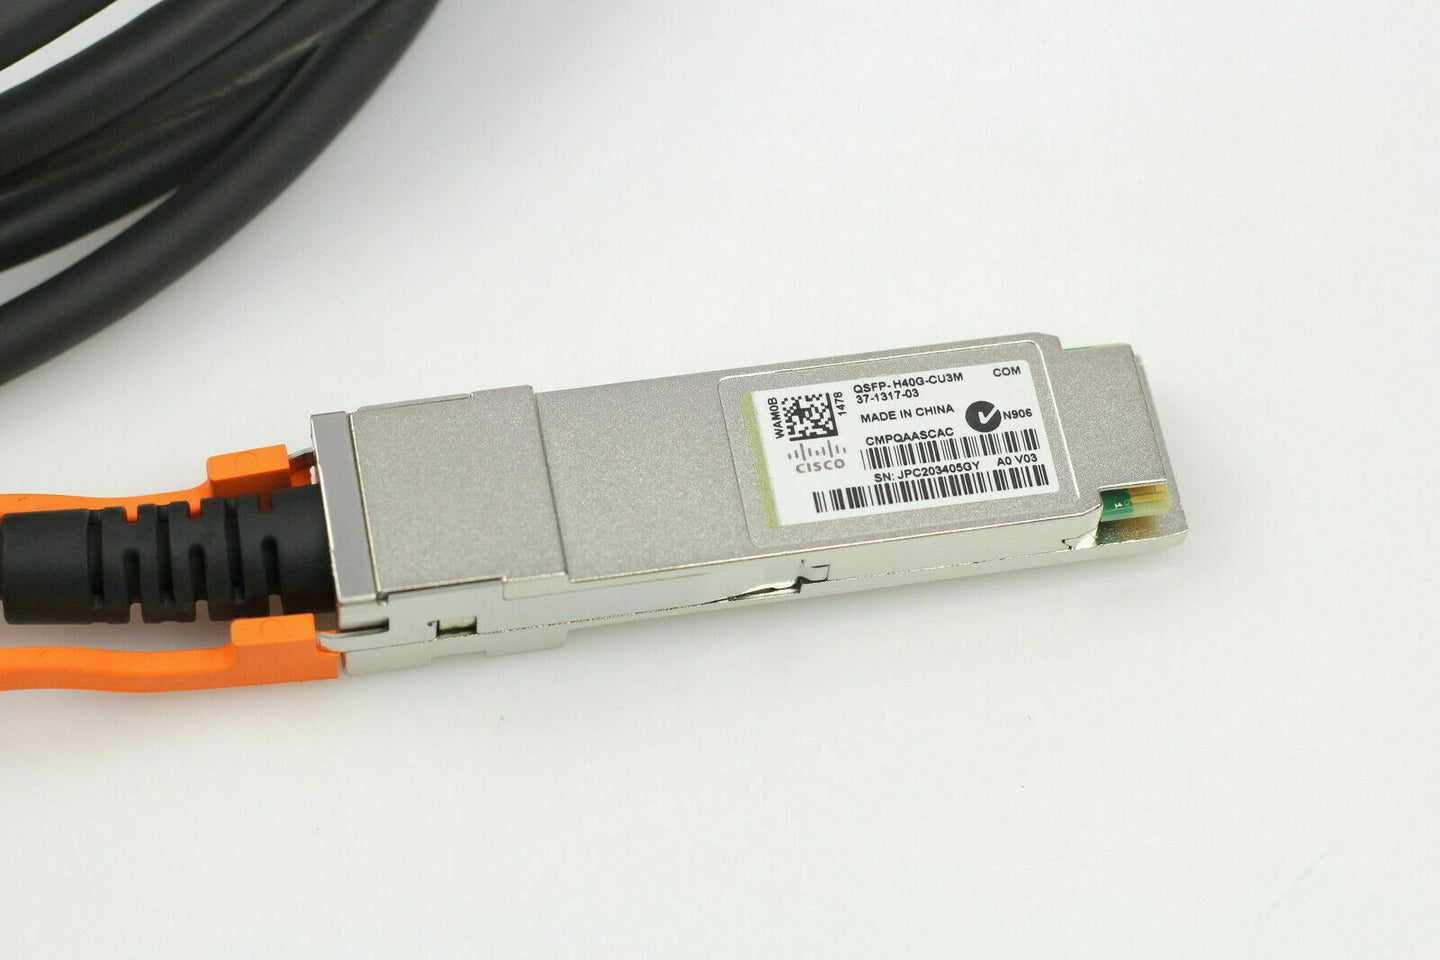 Cisco QSFP-H40G-CU3M 37-1317-03 DAC Direct Attach Cable 40Gb 3m 3 Meter Network